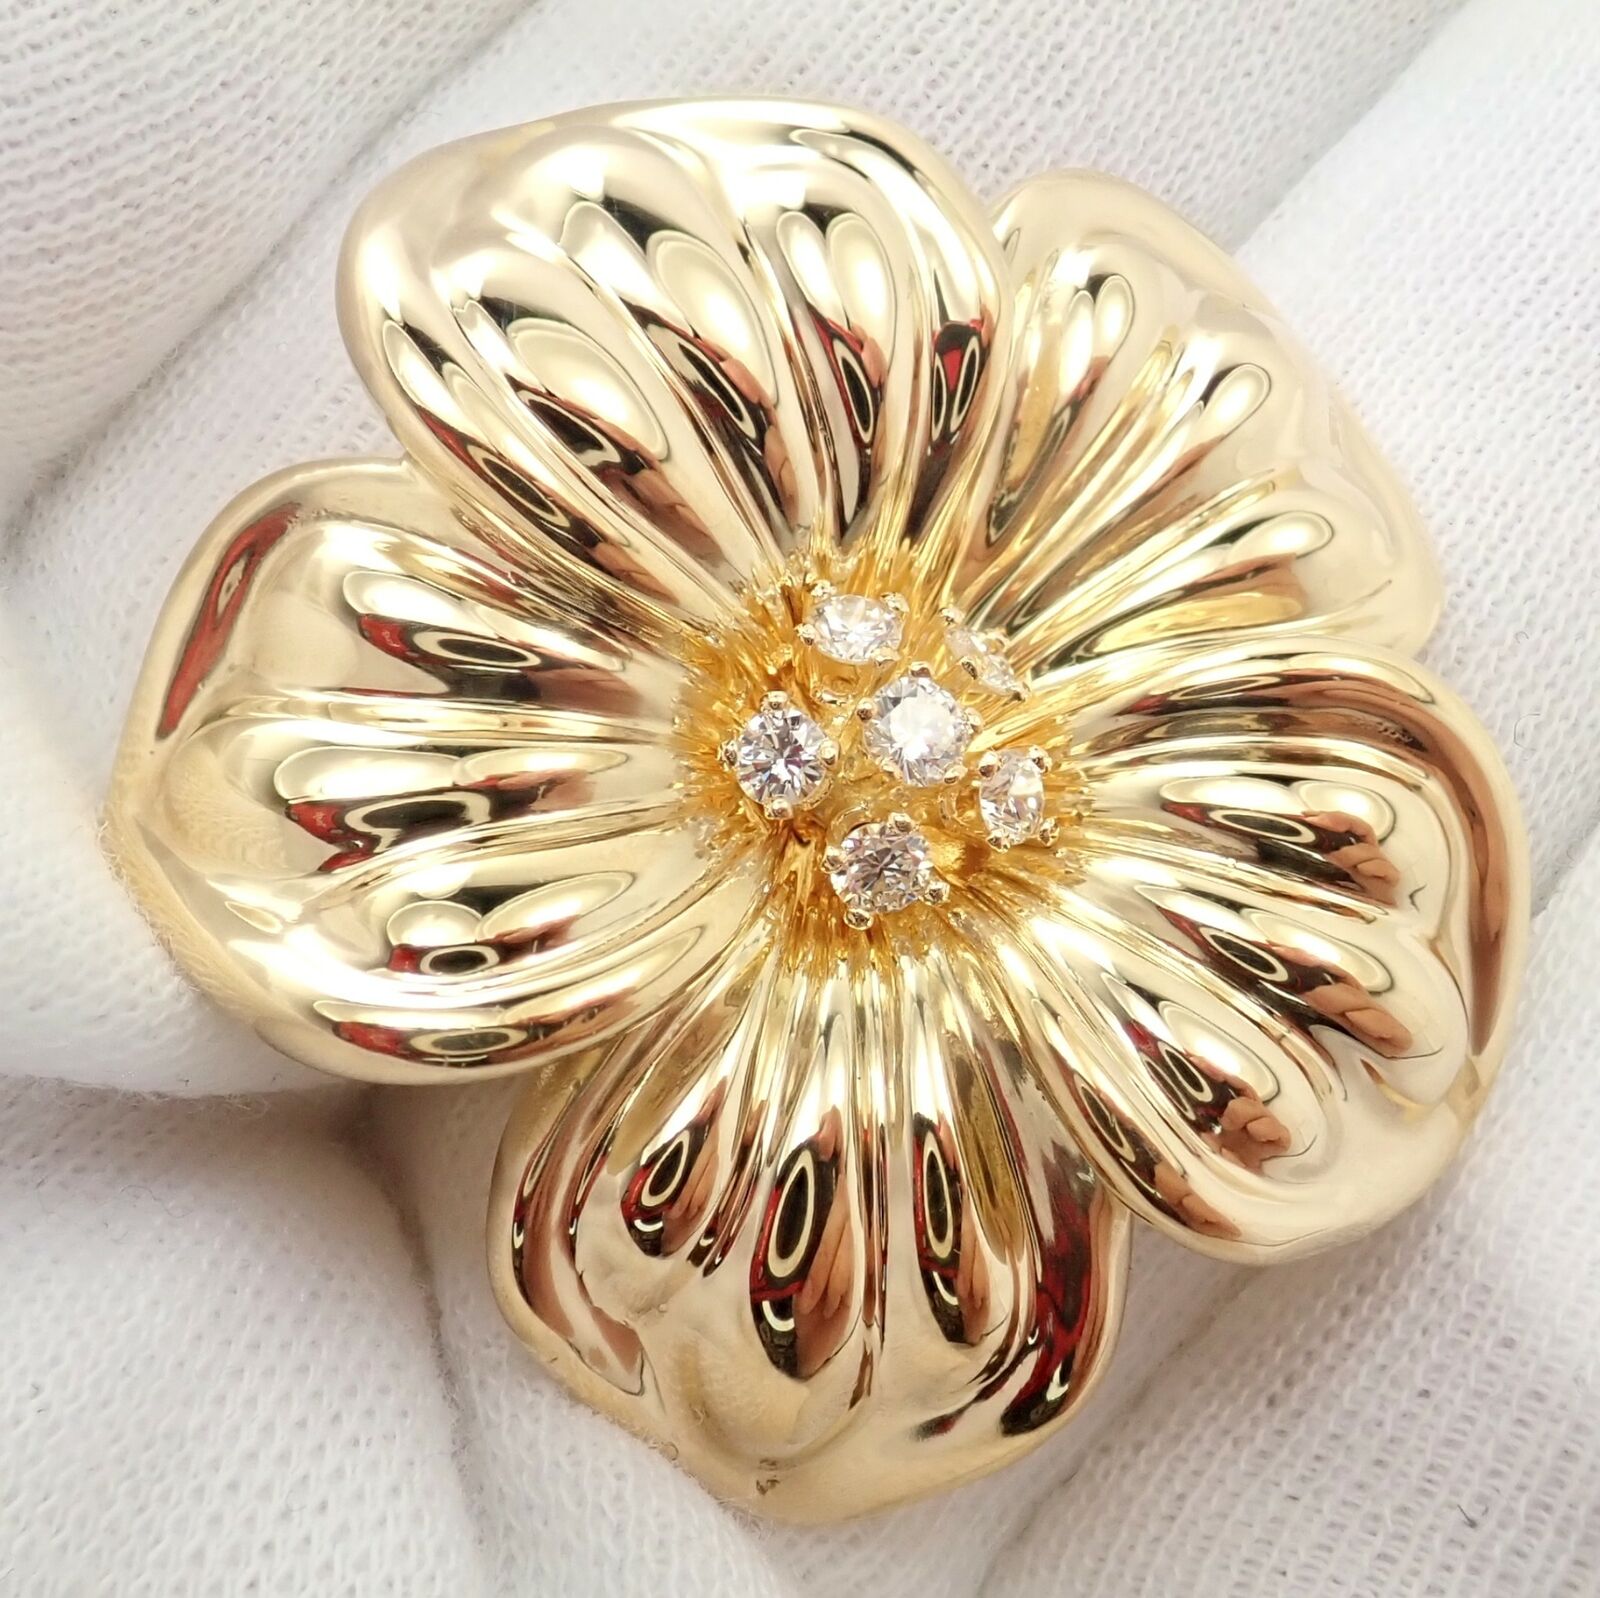 Van Cleef & Arpels Jewelry & Watches:Fine Jewelry:Brooches & Pins Authentic Van Cleef & Arpels Diamond 18k Yellow Gold Large Magnolia Pin Brooch